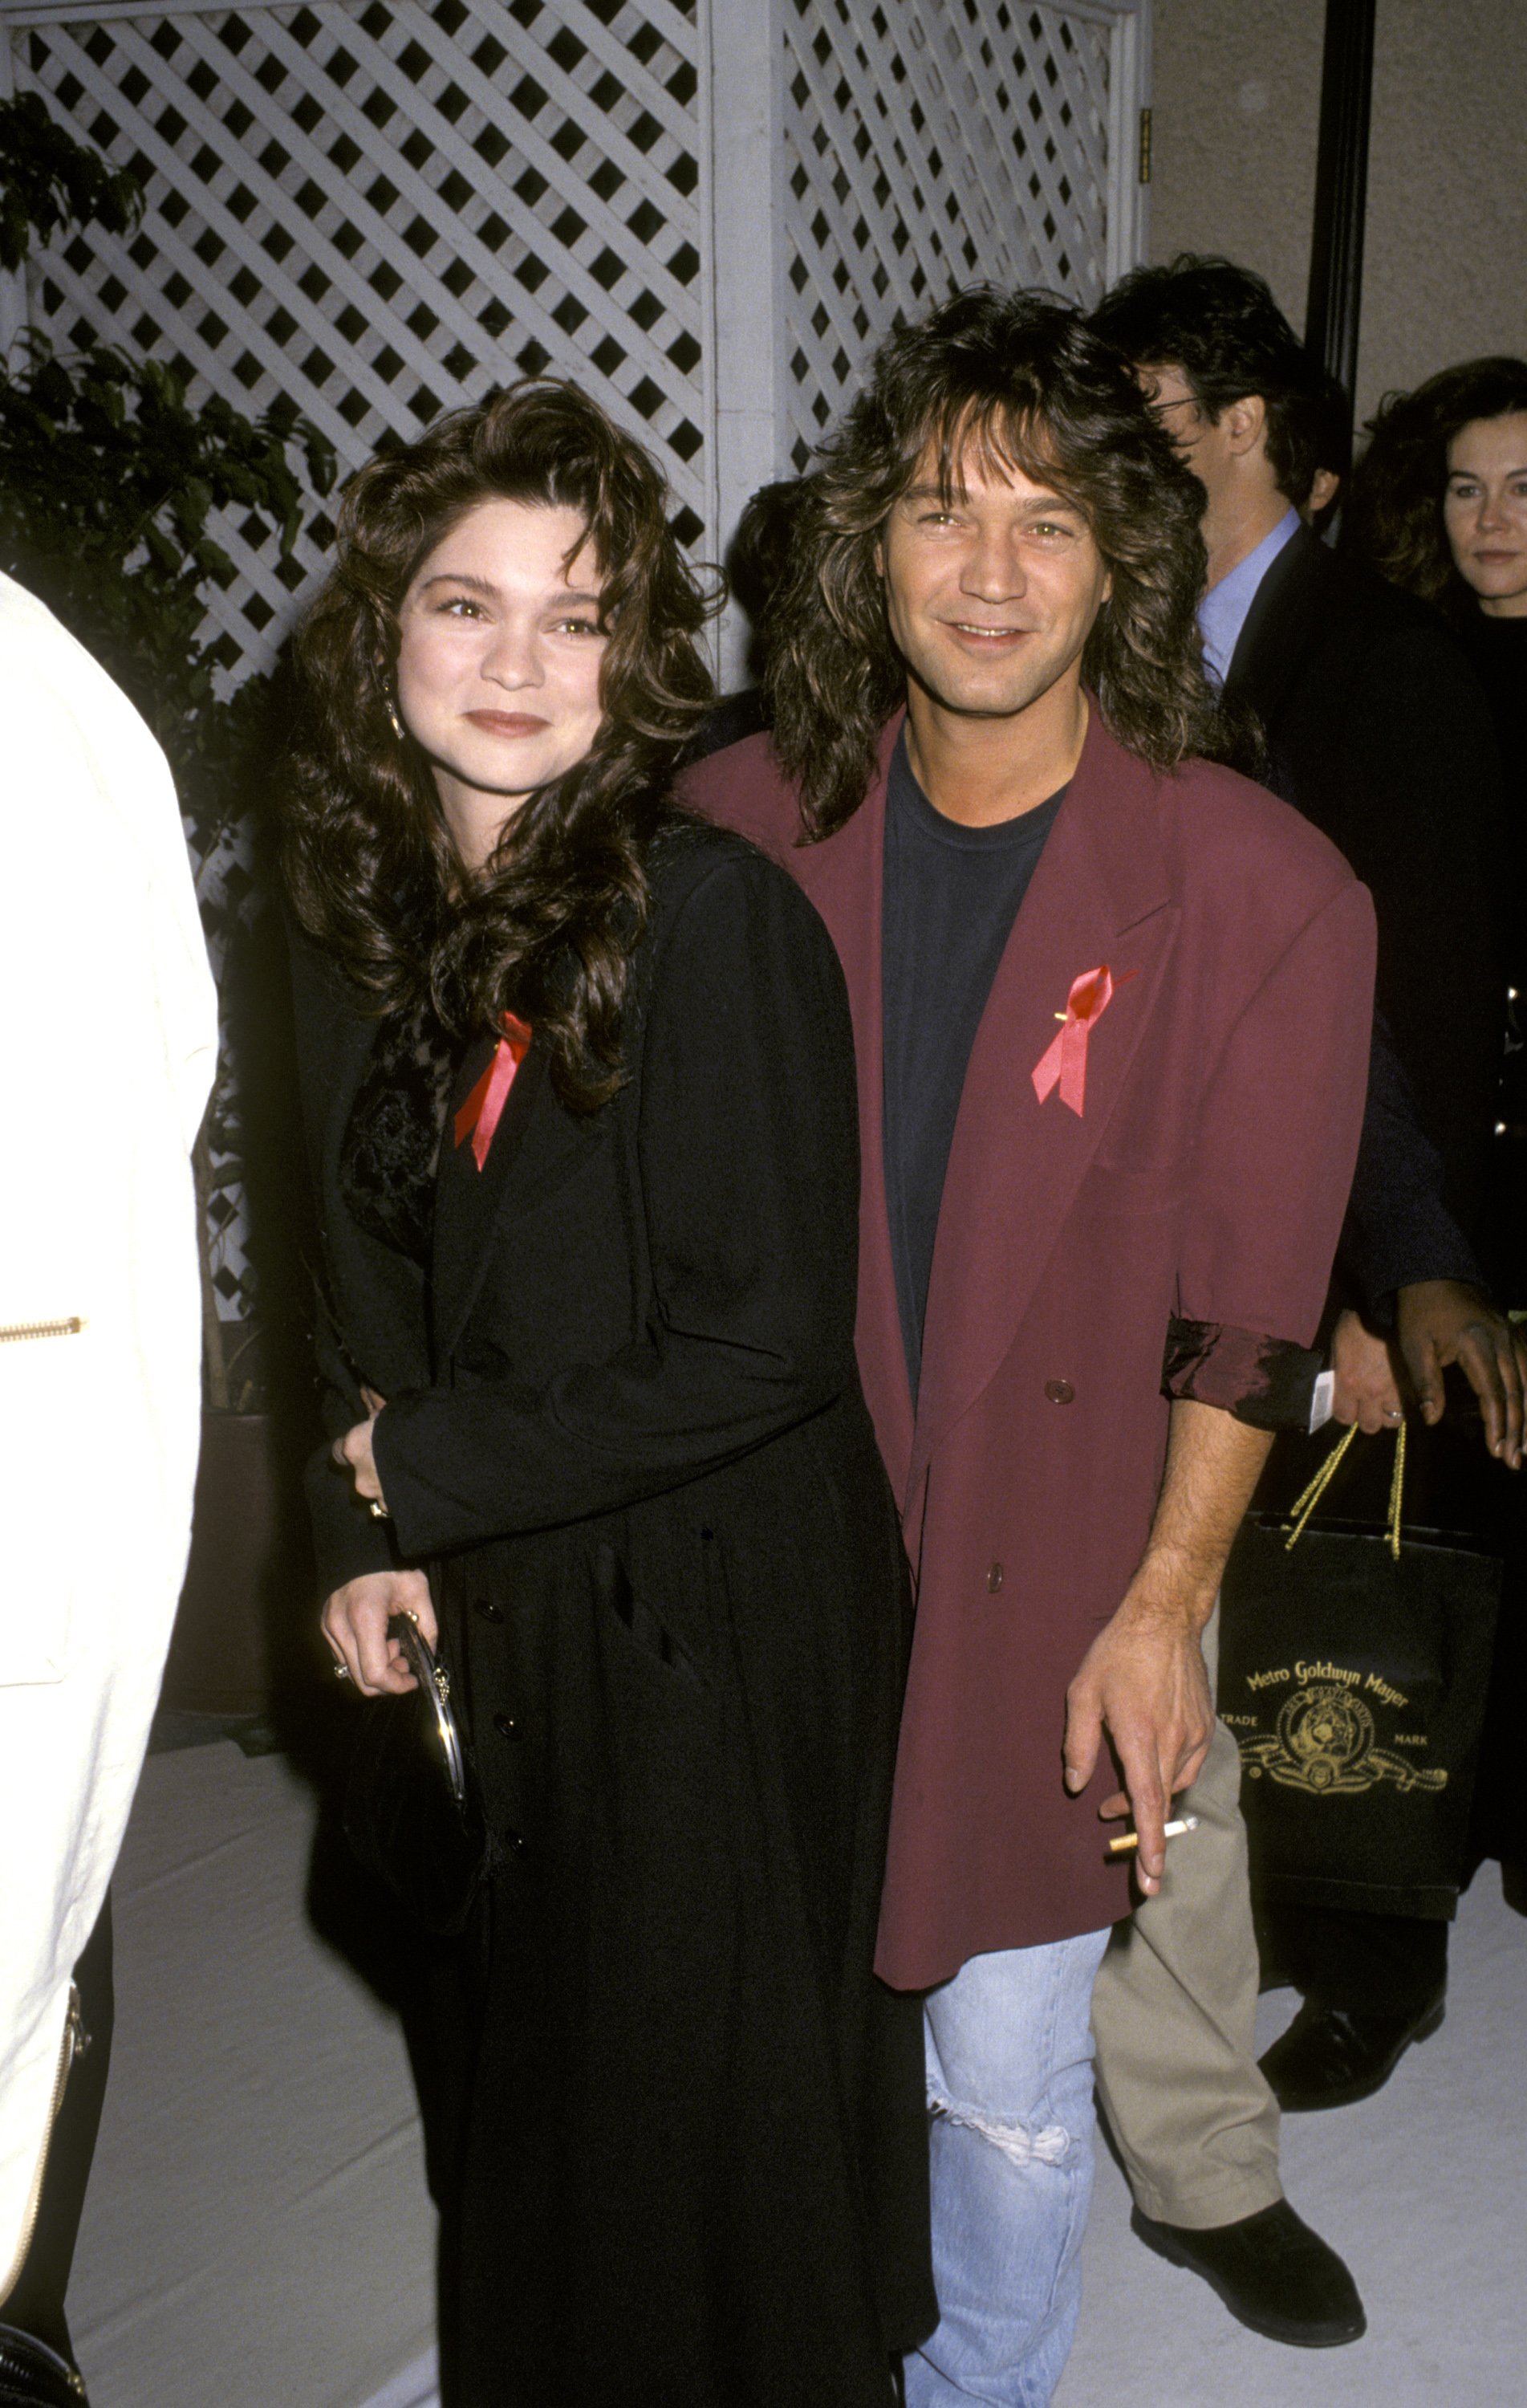  Valerie Bertinelli and Eddie Van Halen attend the APLA 6th Commitment to Life Concert Benefit at Universal Amphitheater in Universal City, California, on November 18, 1992 | Source: Getty Images